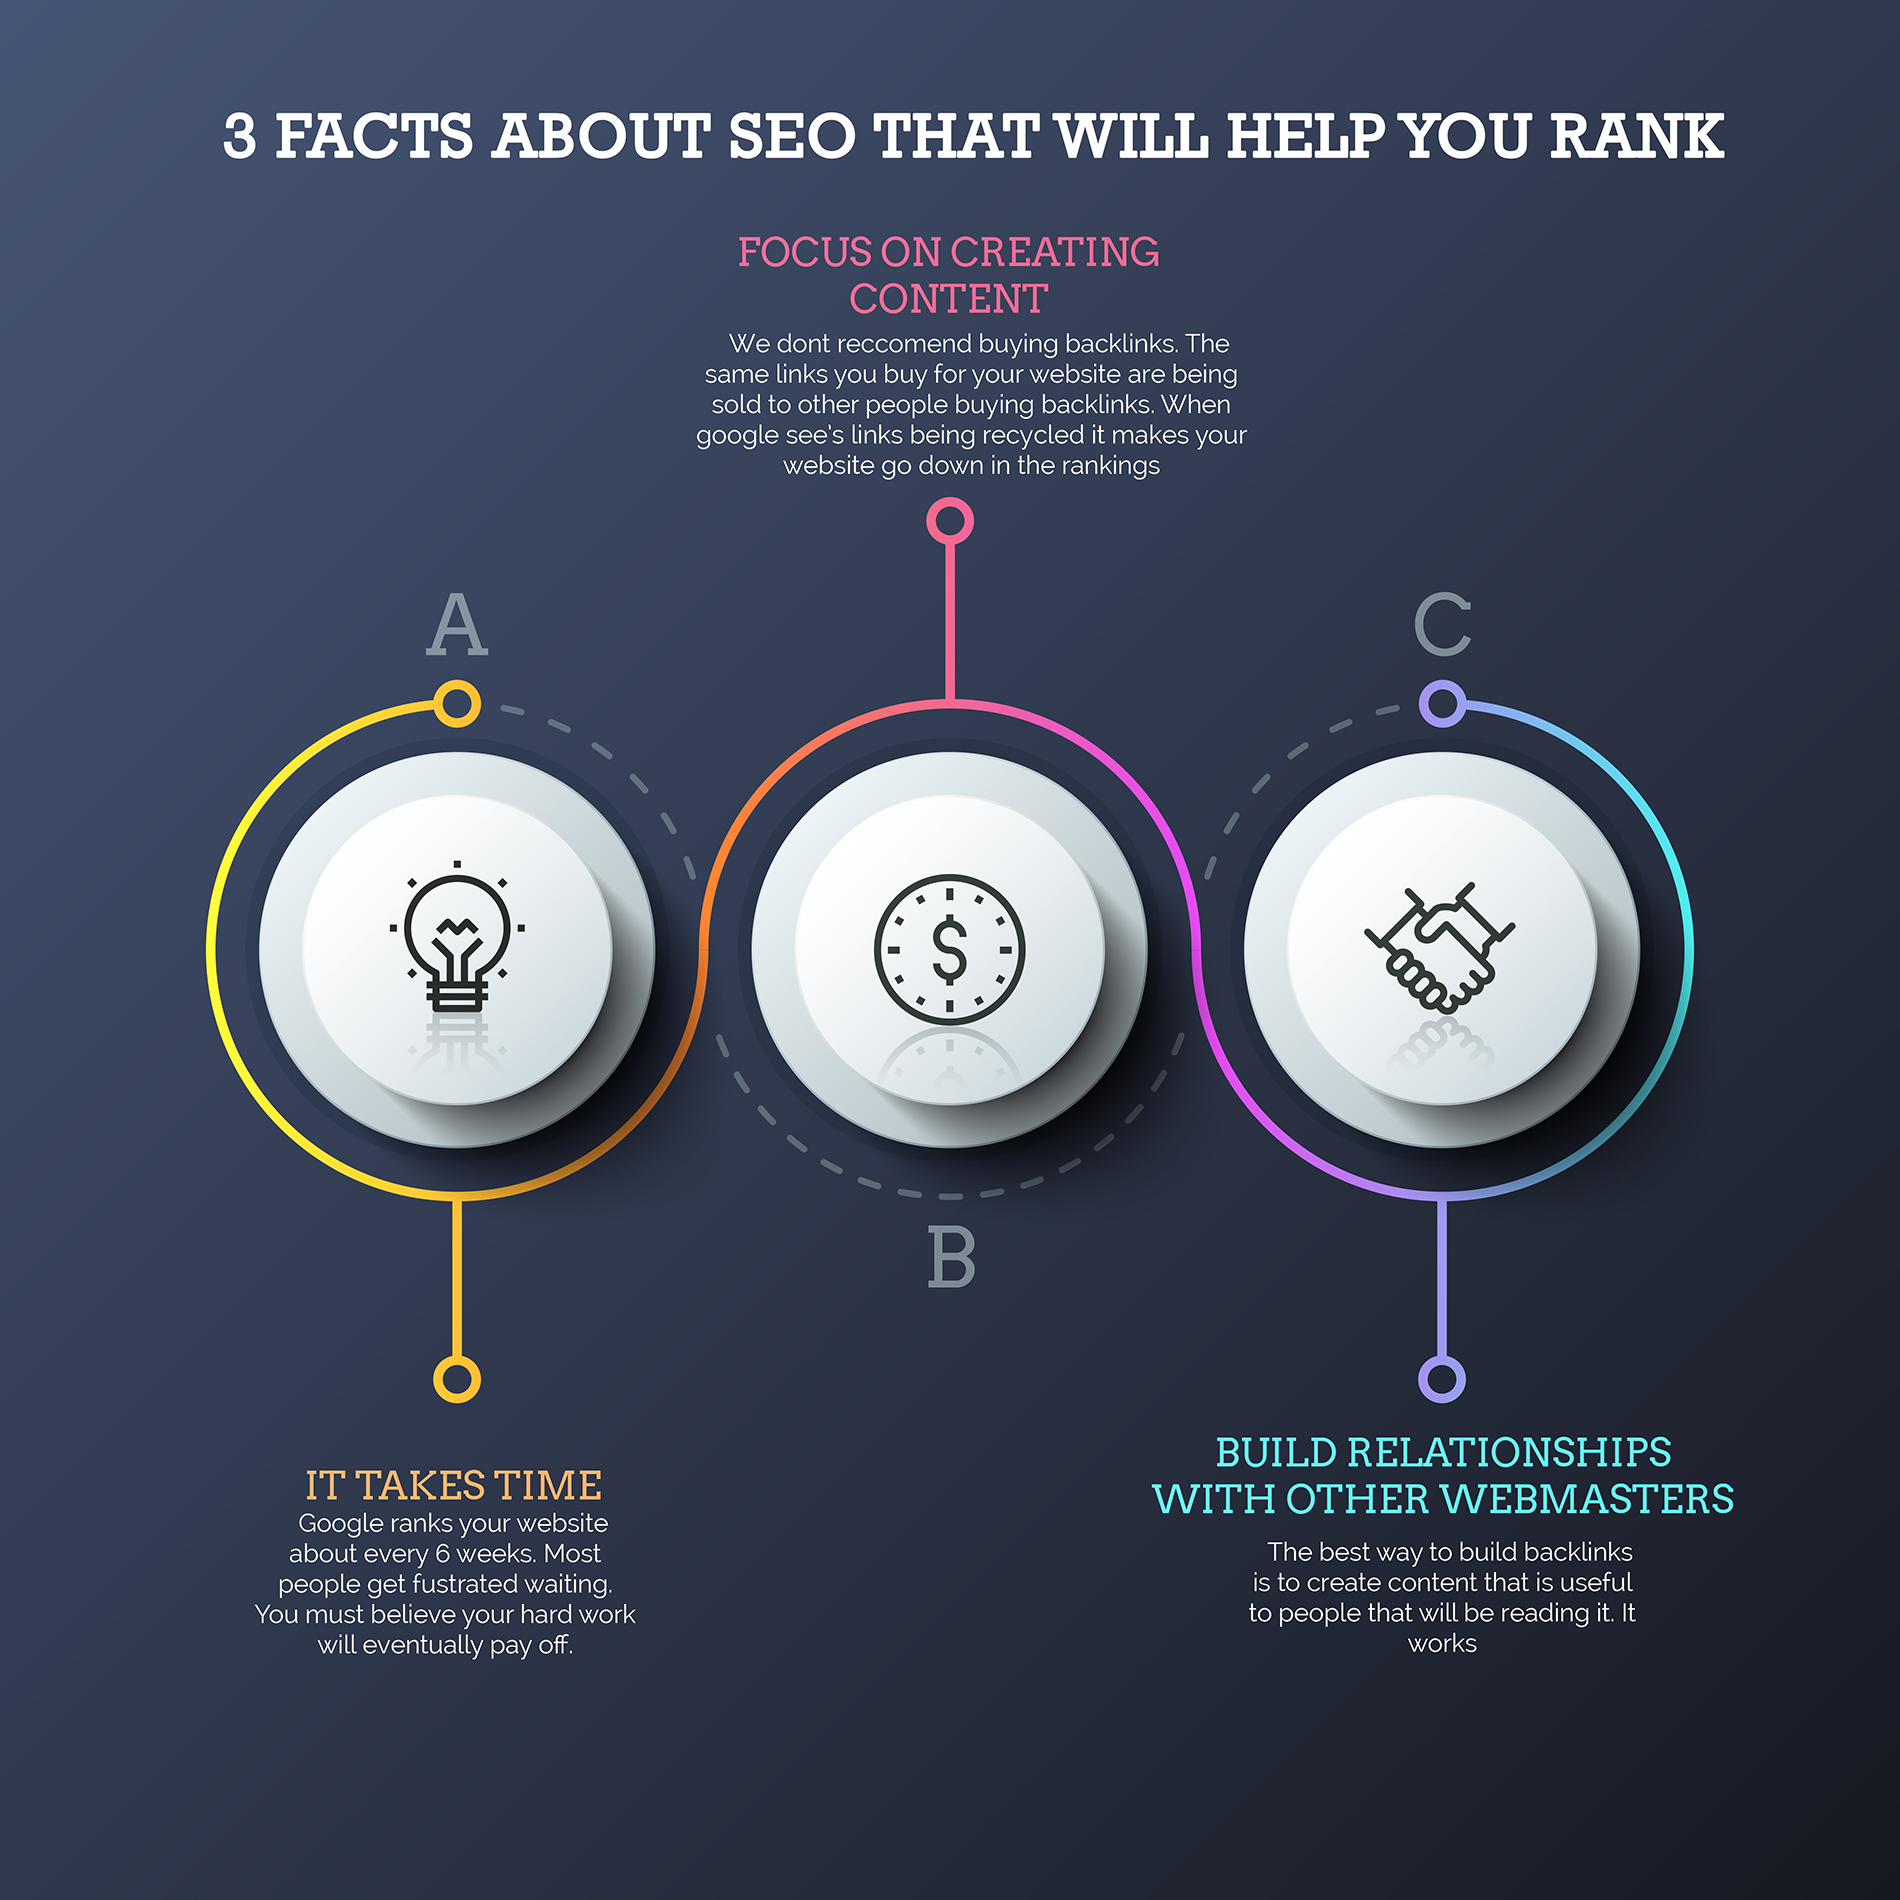 Infographic showing 3 facts about SEO that will help website rankings